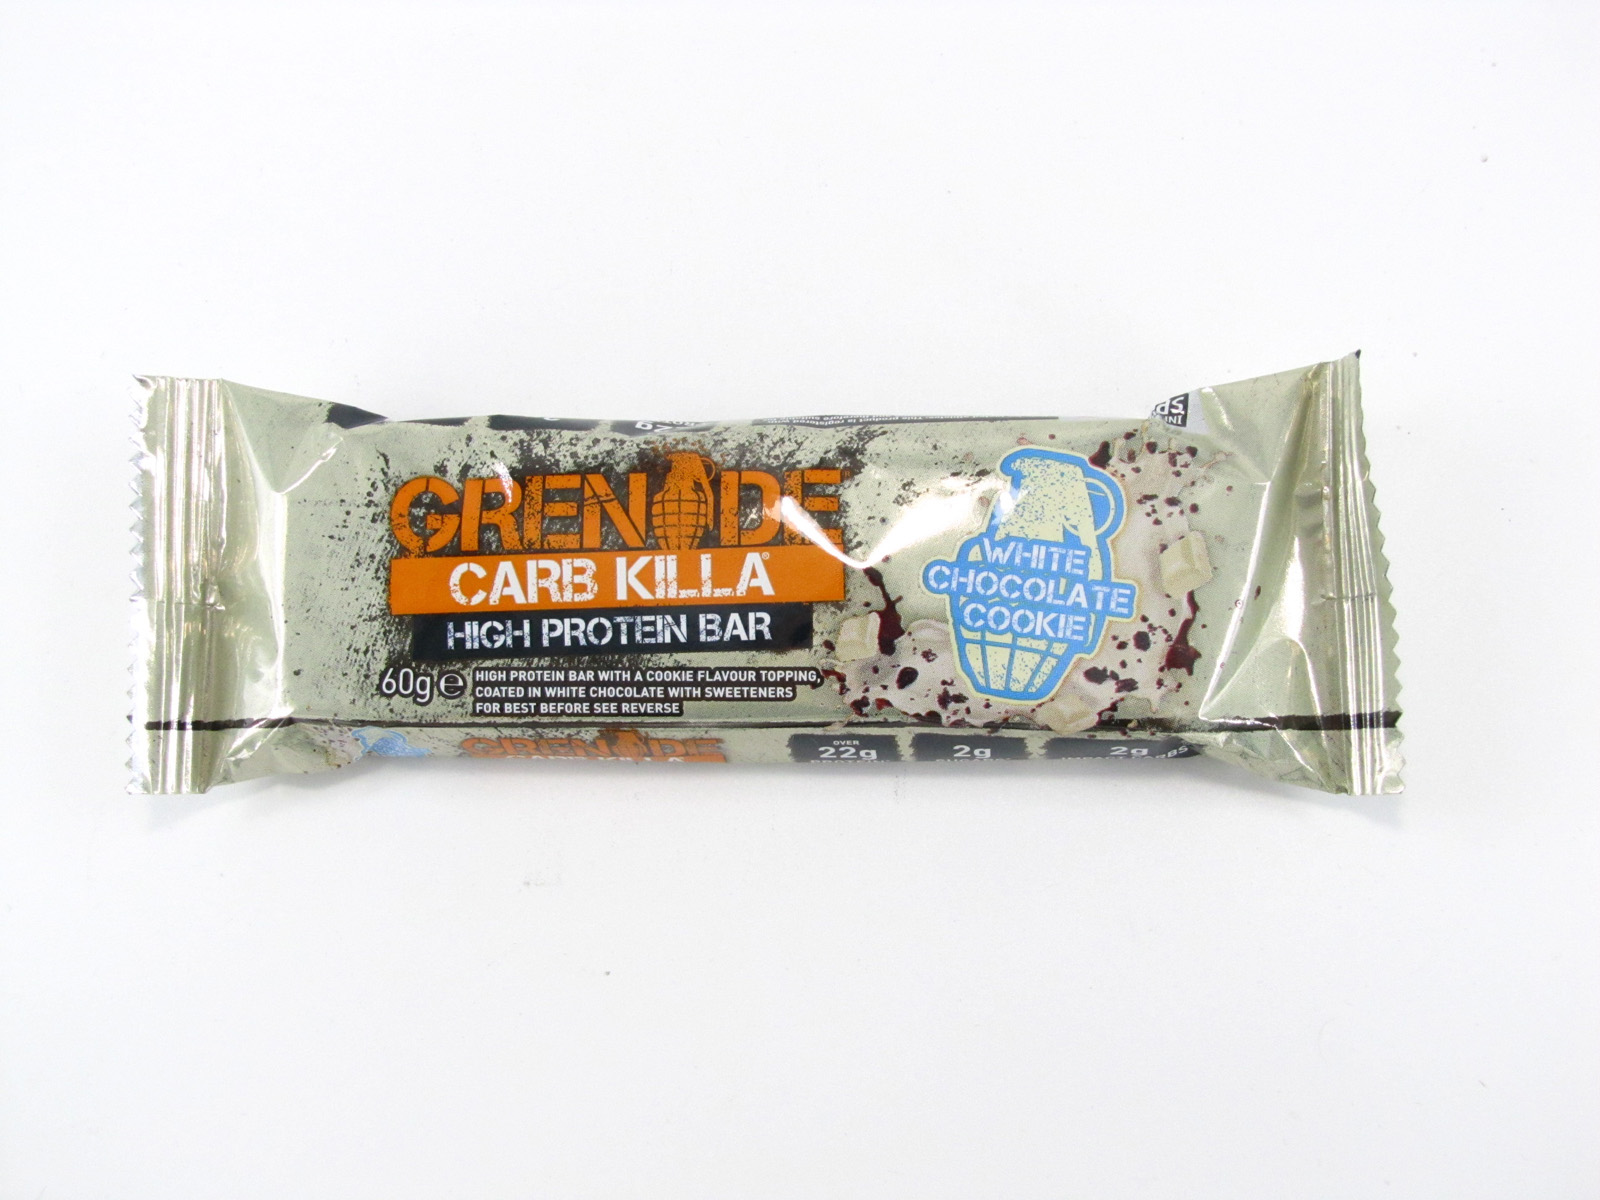 Grenade Carb Killa Protein Bar - White Chocolate Cookie - front view